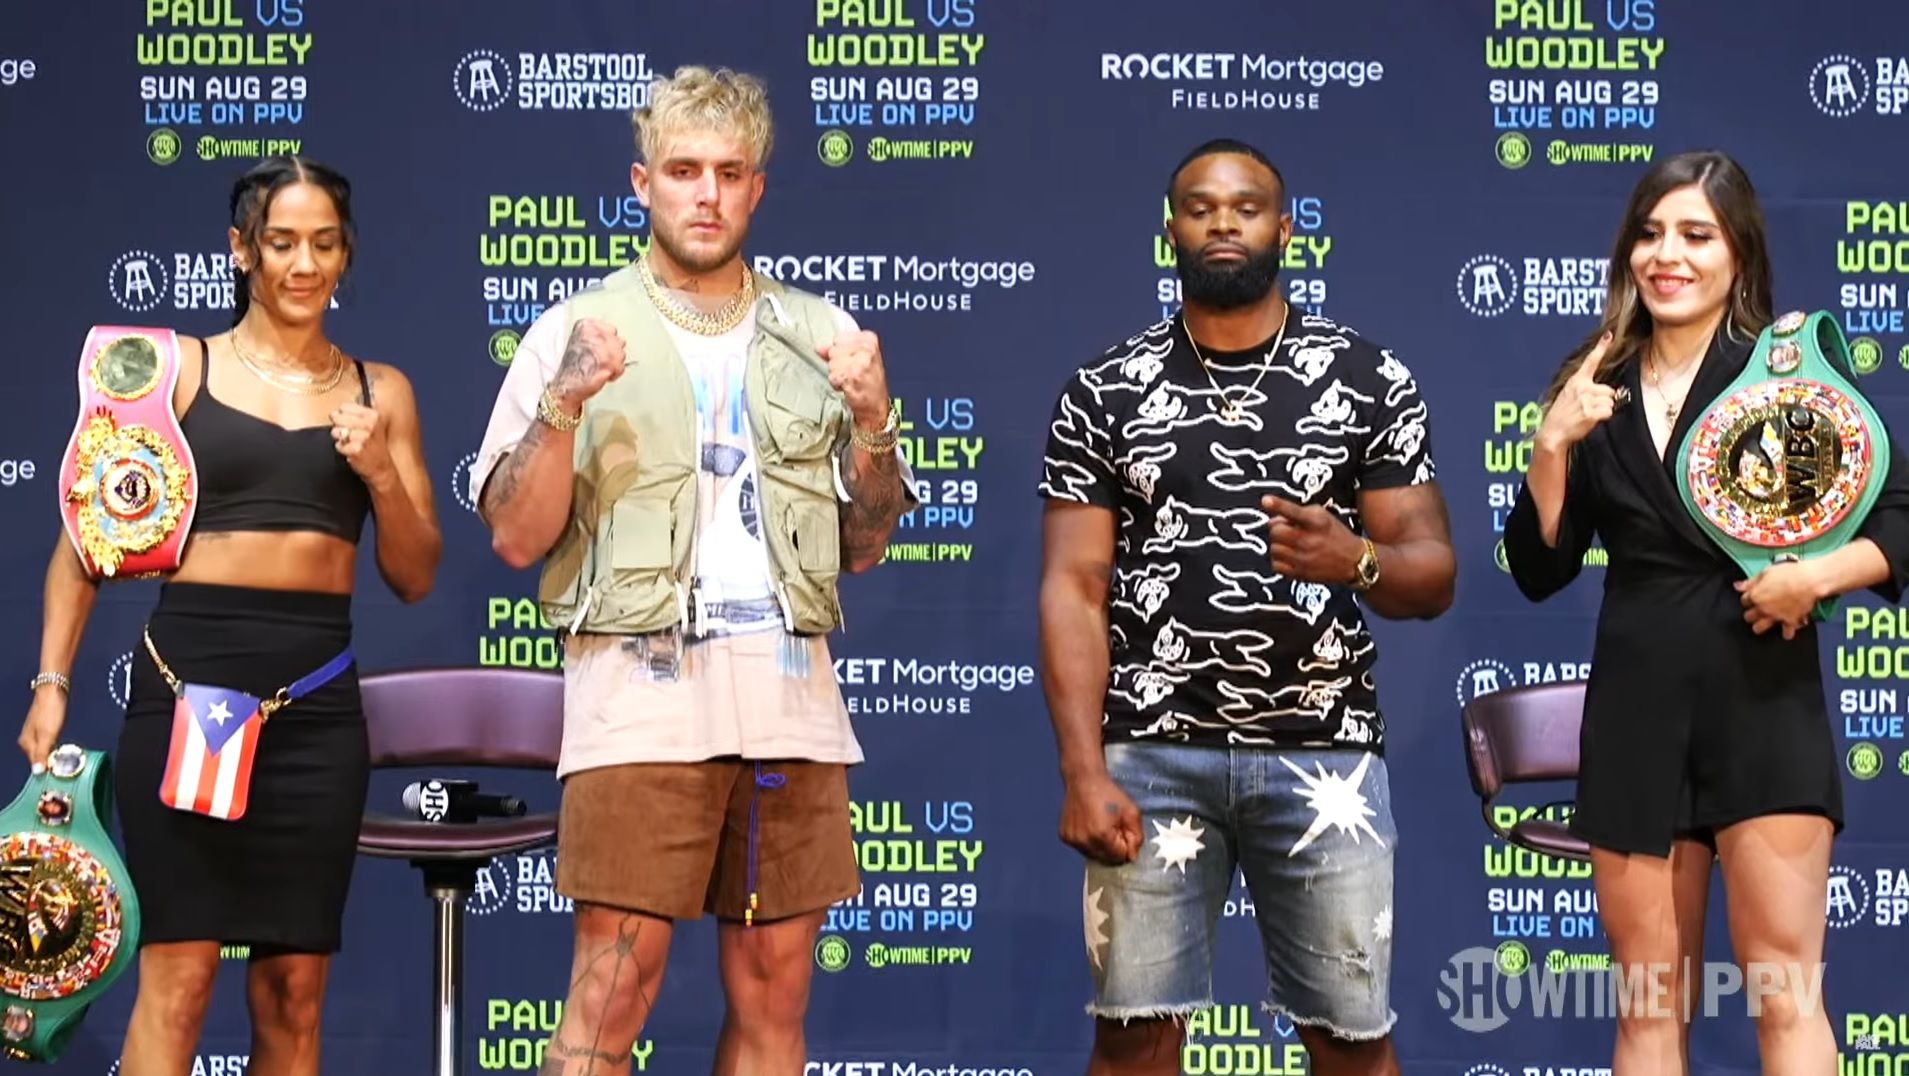 Jake Paul vs. Tyron Woodley – Fight Preview & Analysis